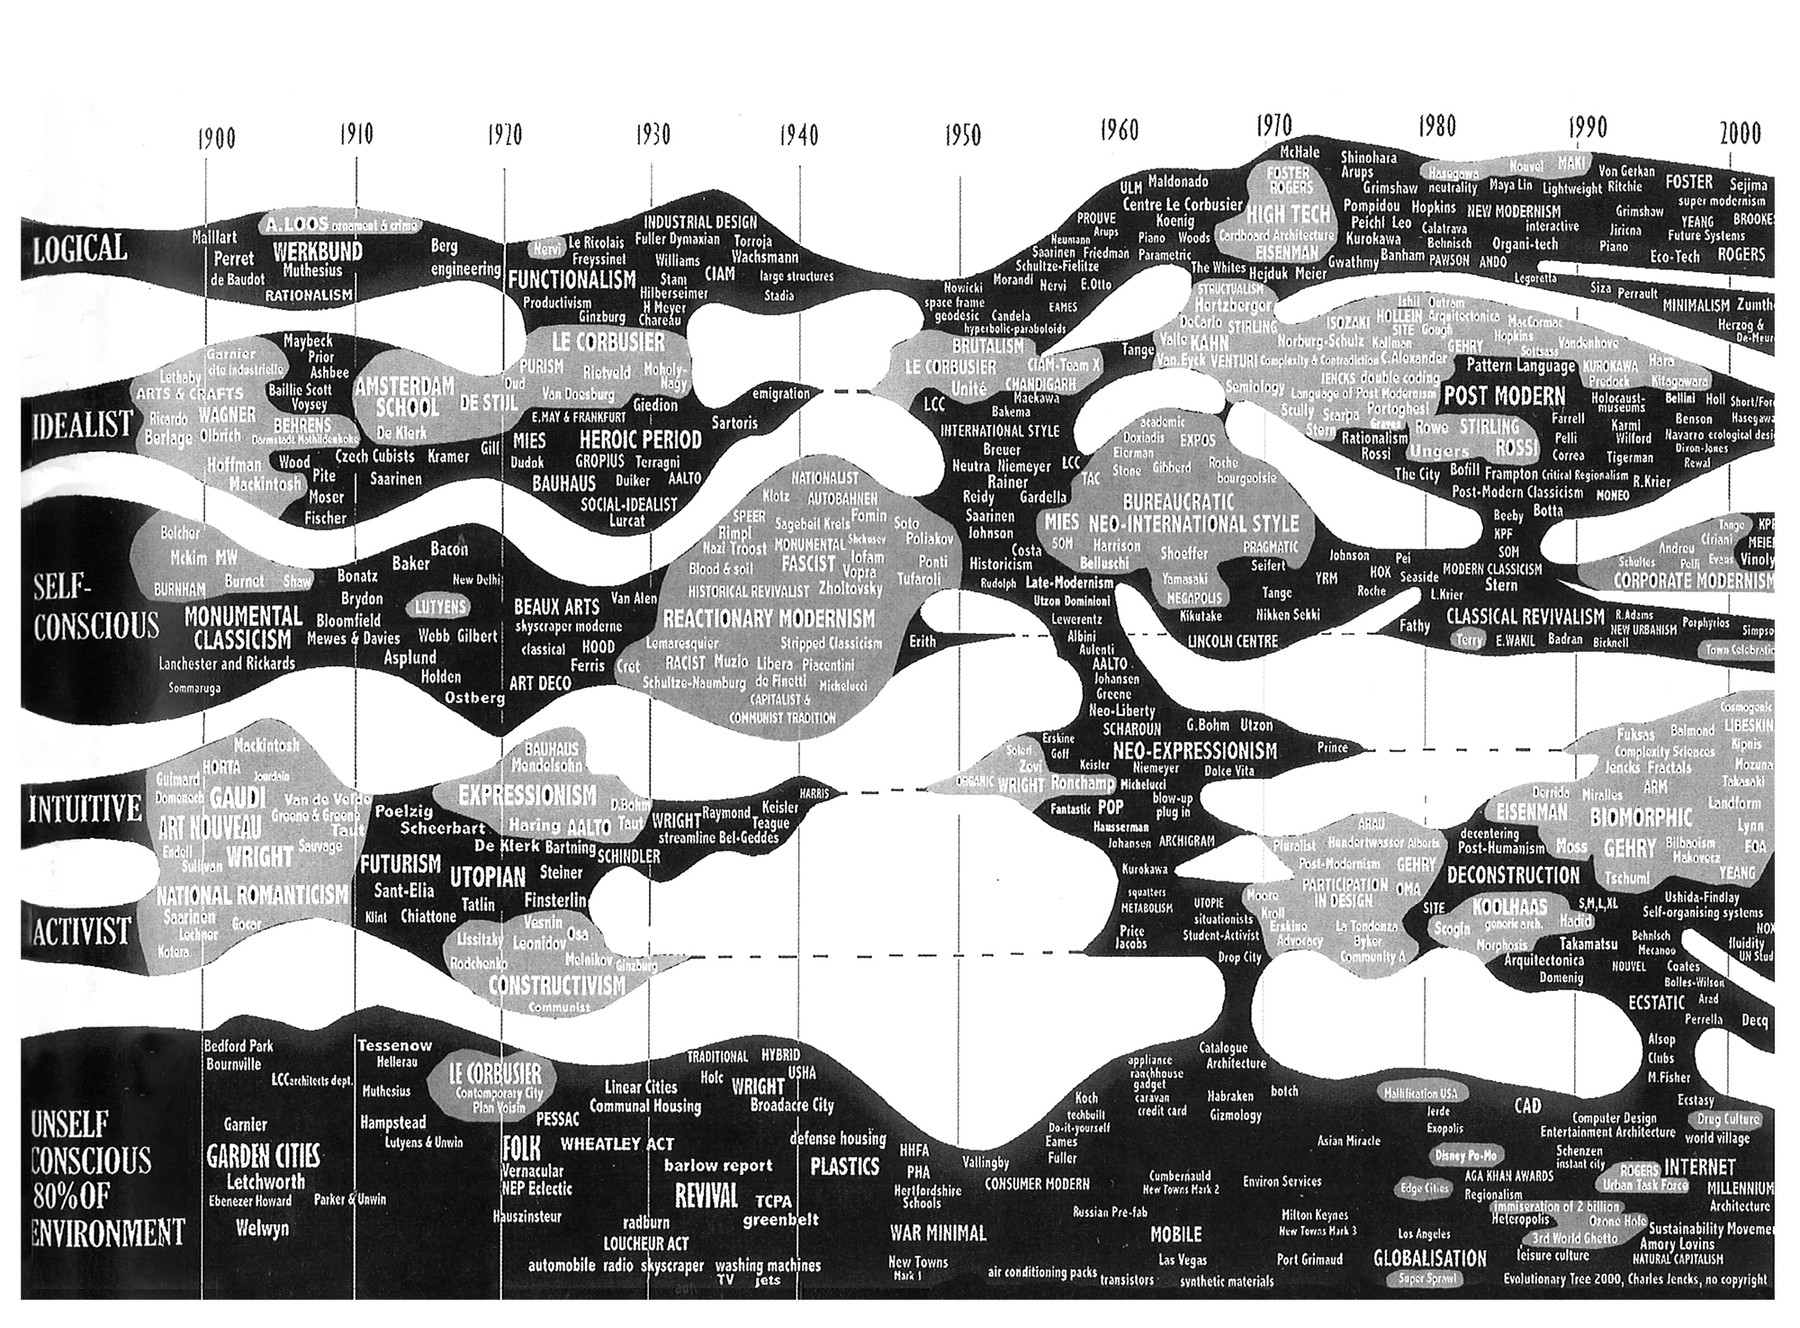 Charles Jencks, "Post-Modern Evolution – Evolutionary Tree" in The New Paradigm in Architecture: The Language of Postmodernism (2002)